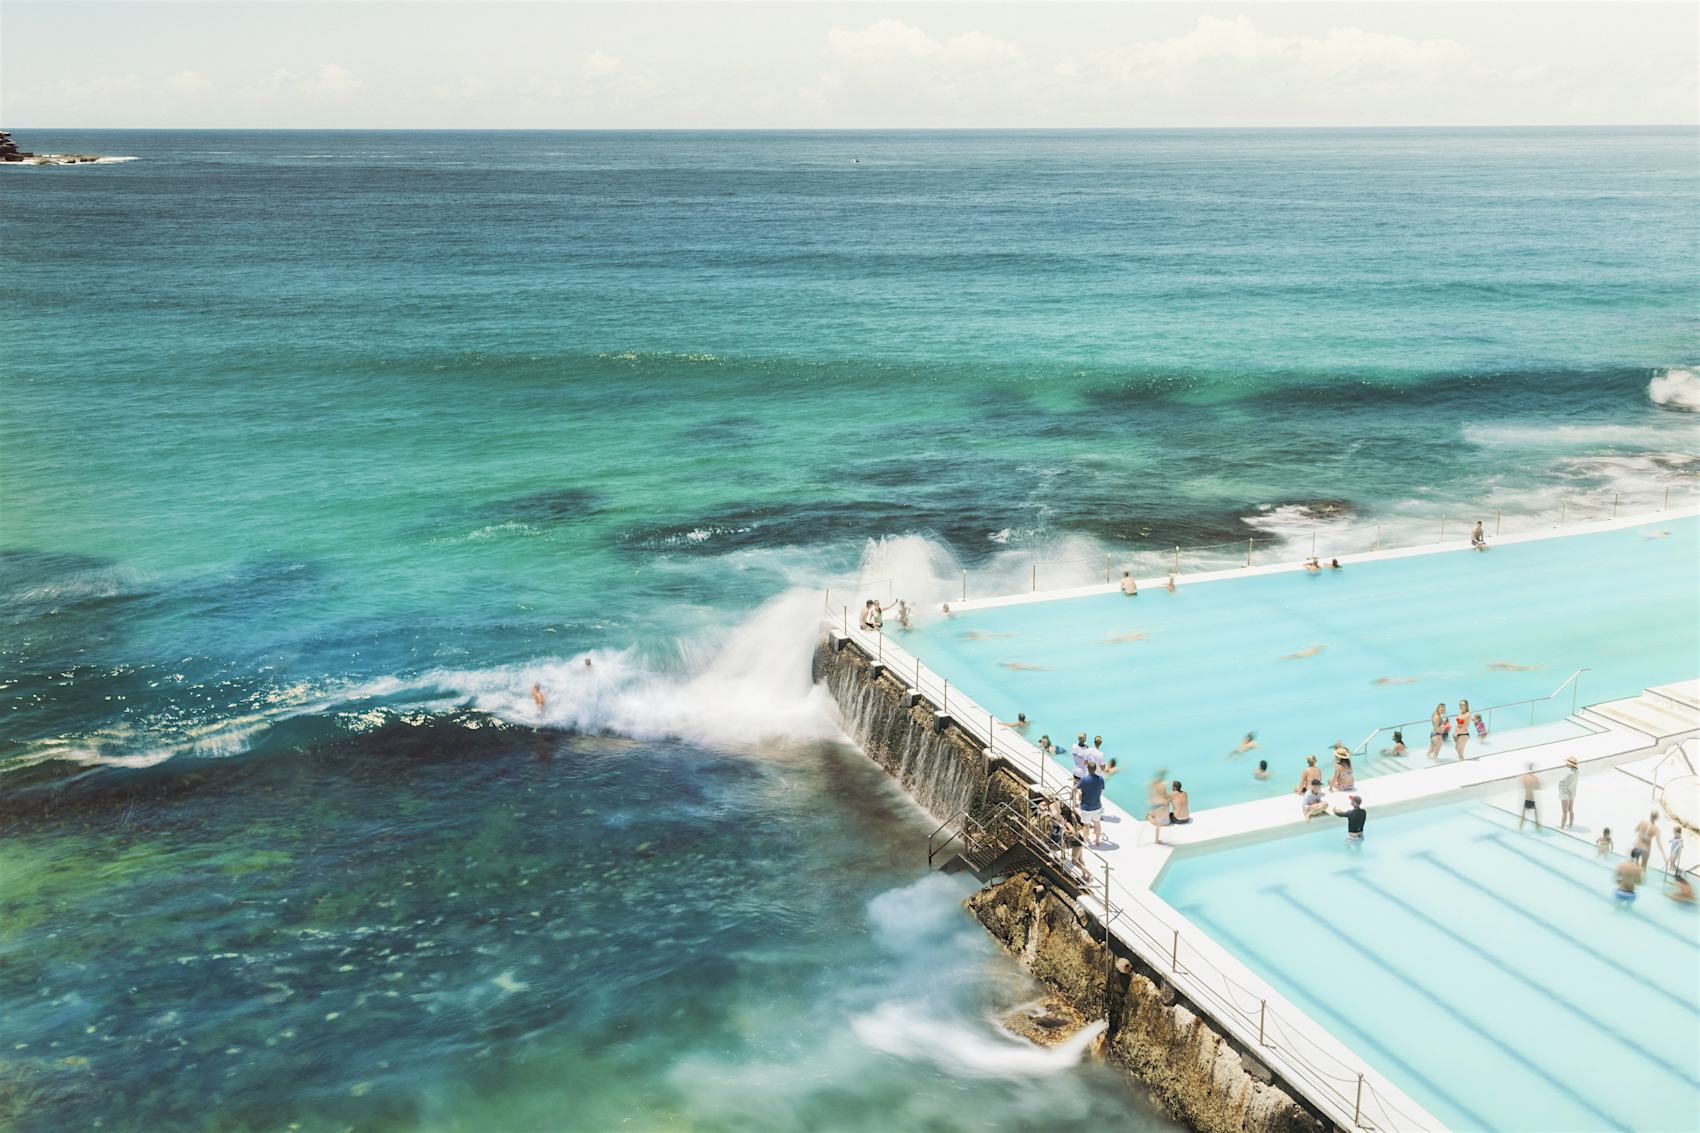 The saltwater Bondi Baths are carved out of the cliffs and have been a landmark of Bondi Beach for more than 100 years.